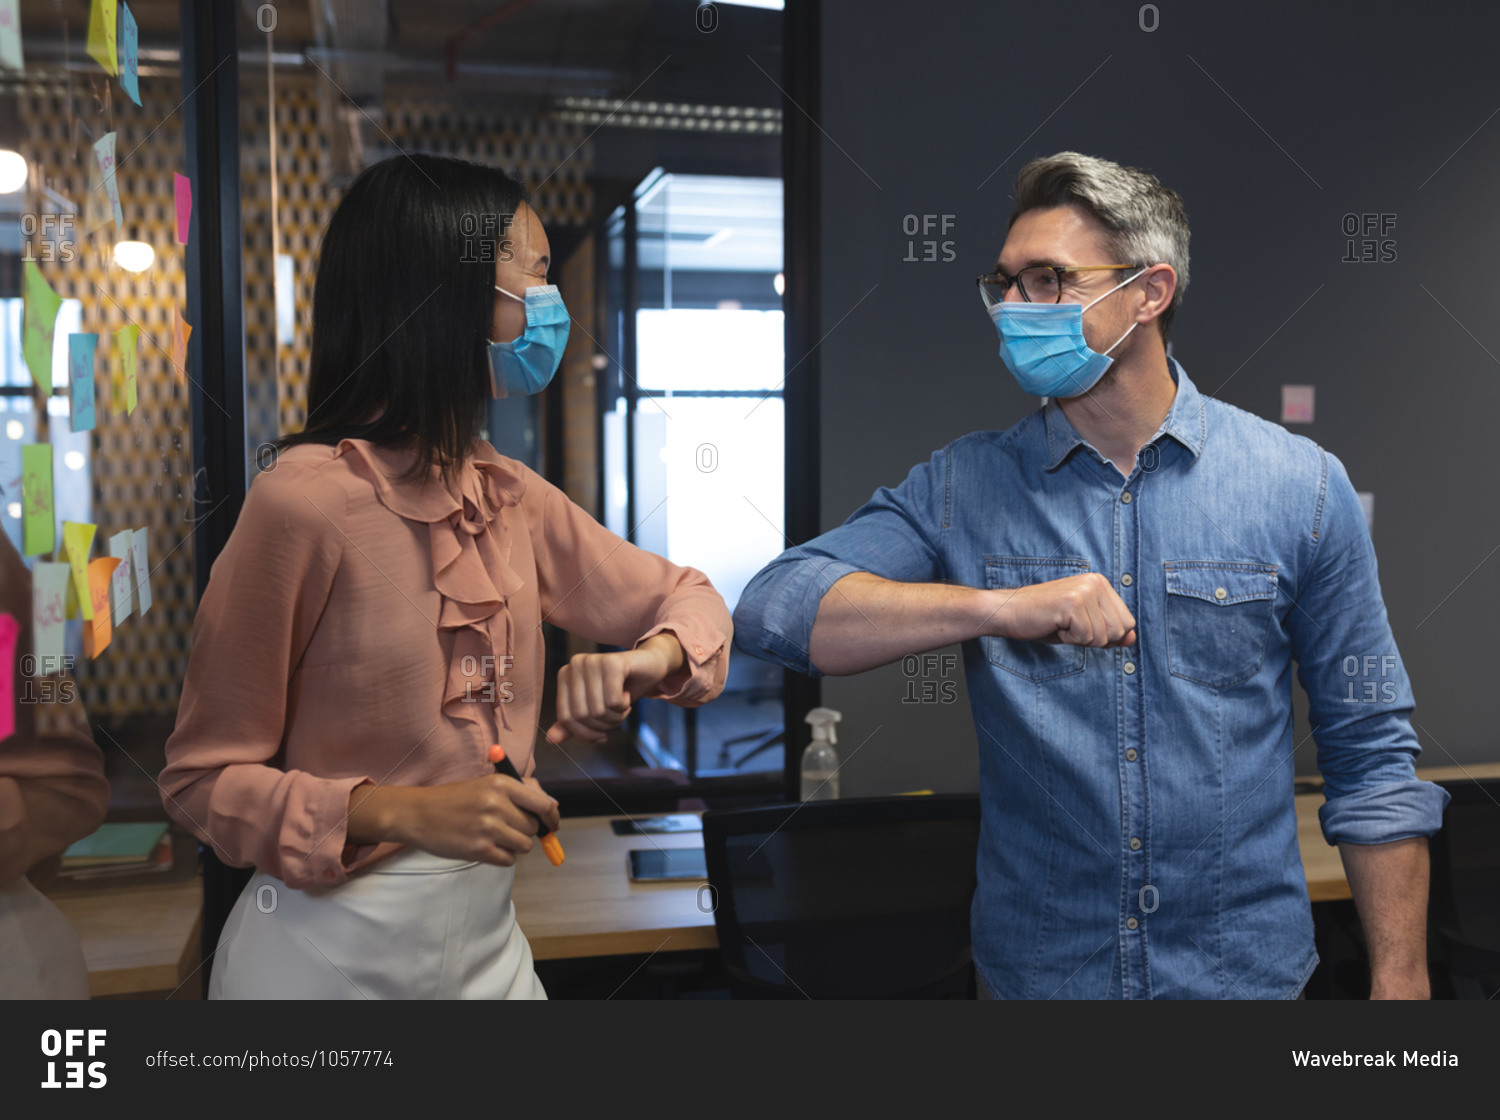 Caucasian man and Asian woman wearing face masks greeting each other by touching elbows at modern office.